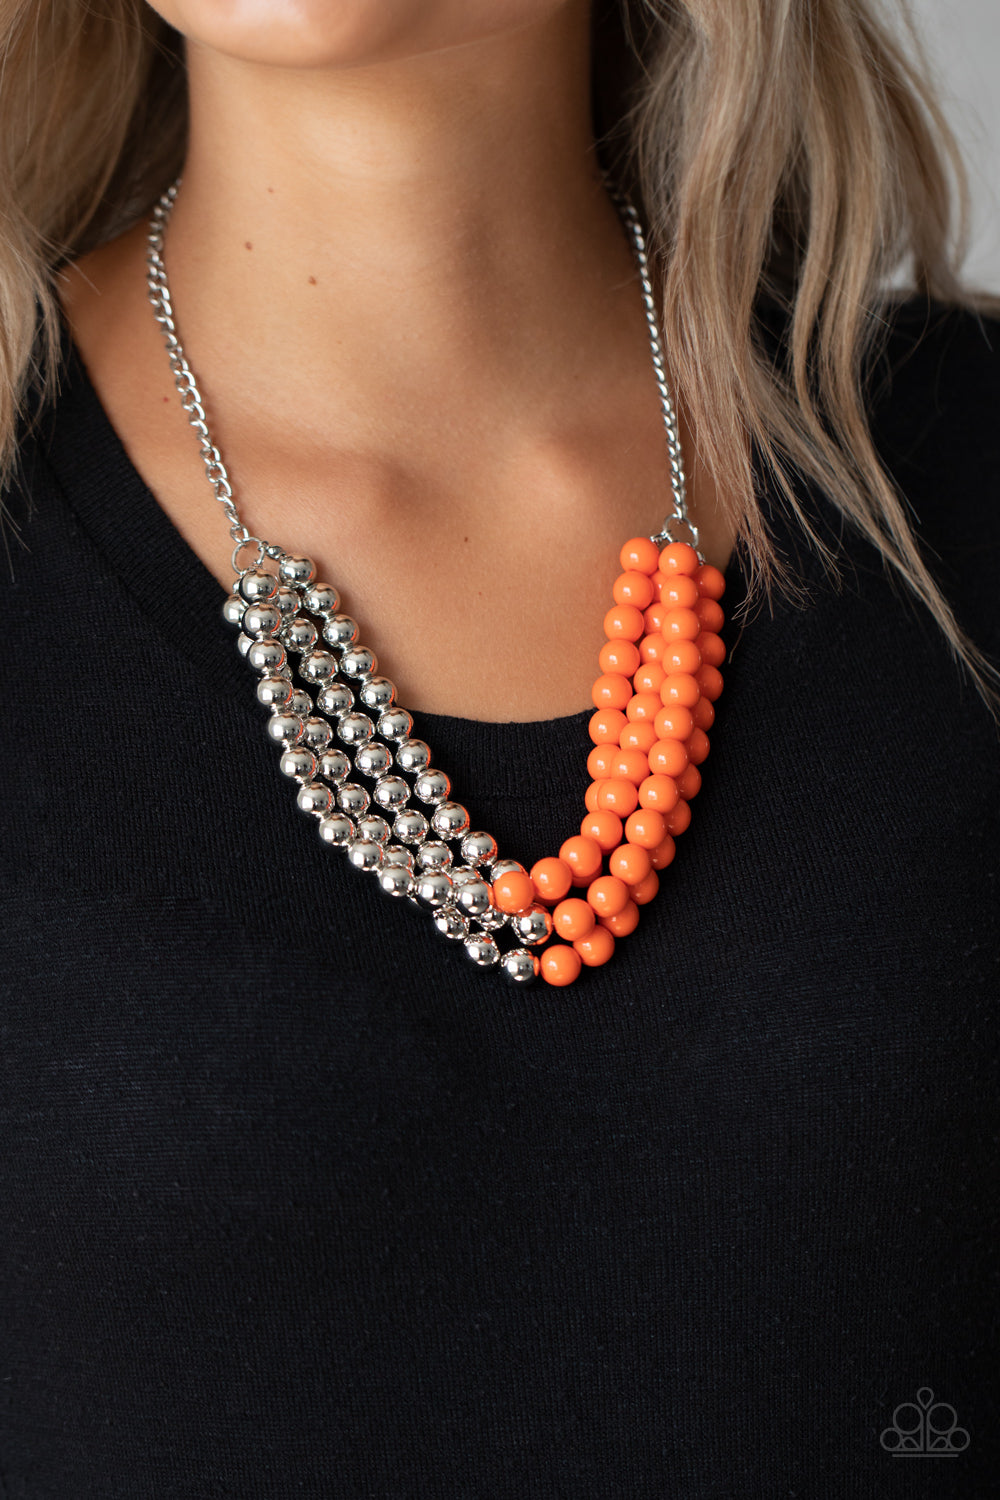 Layer After Layer - Orange necklace